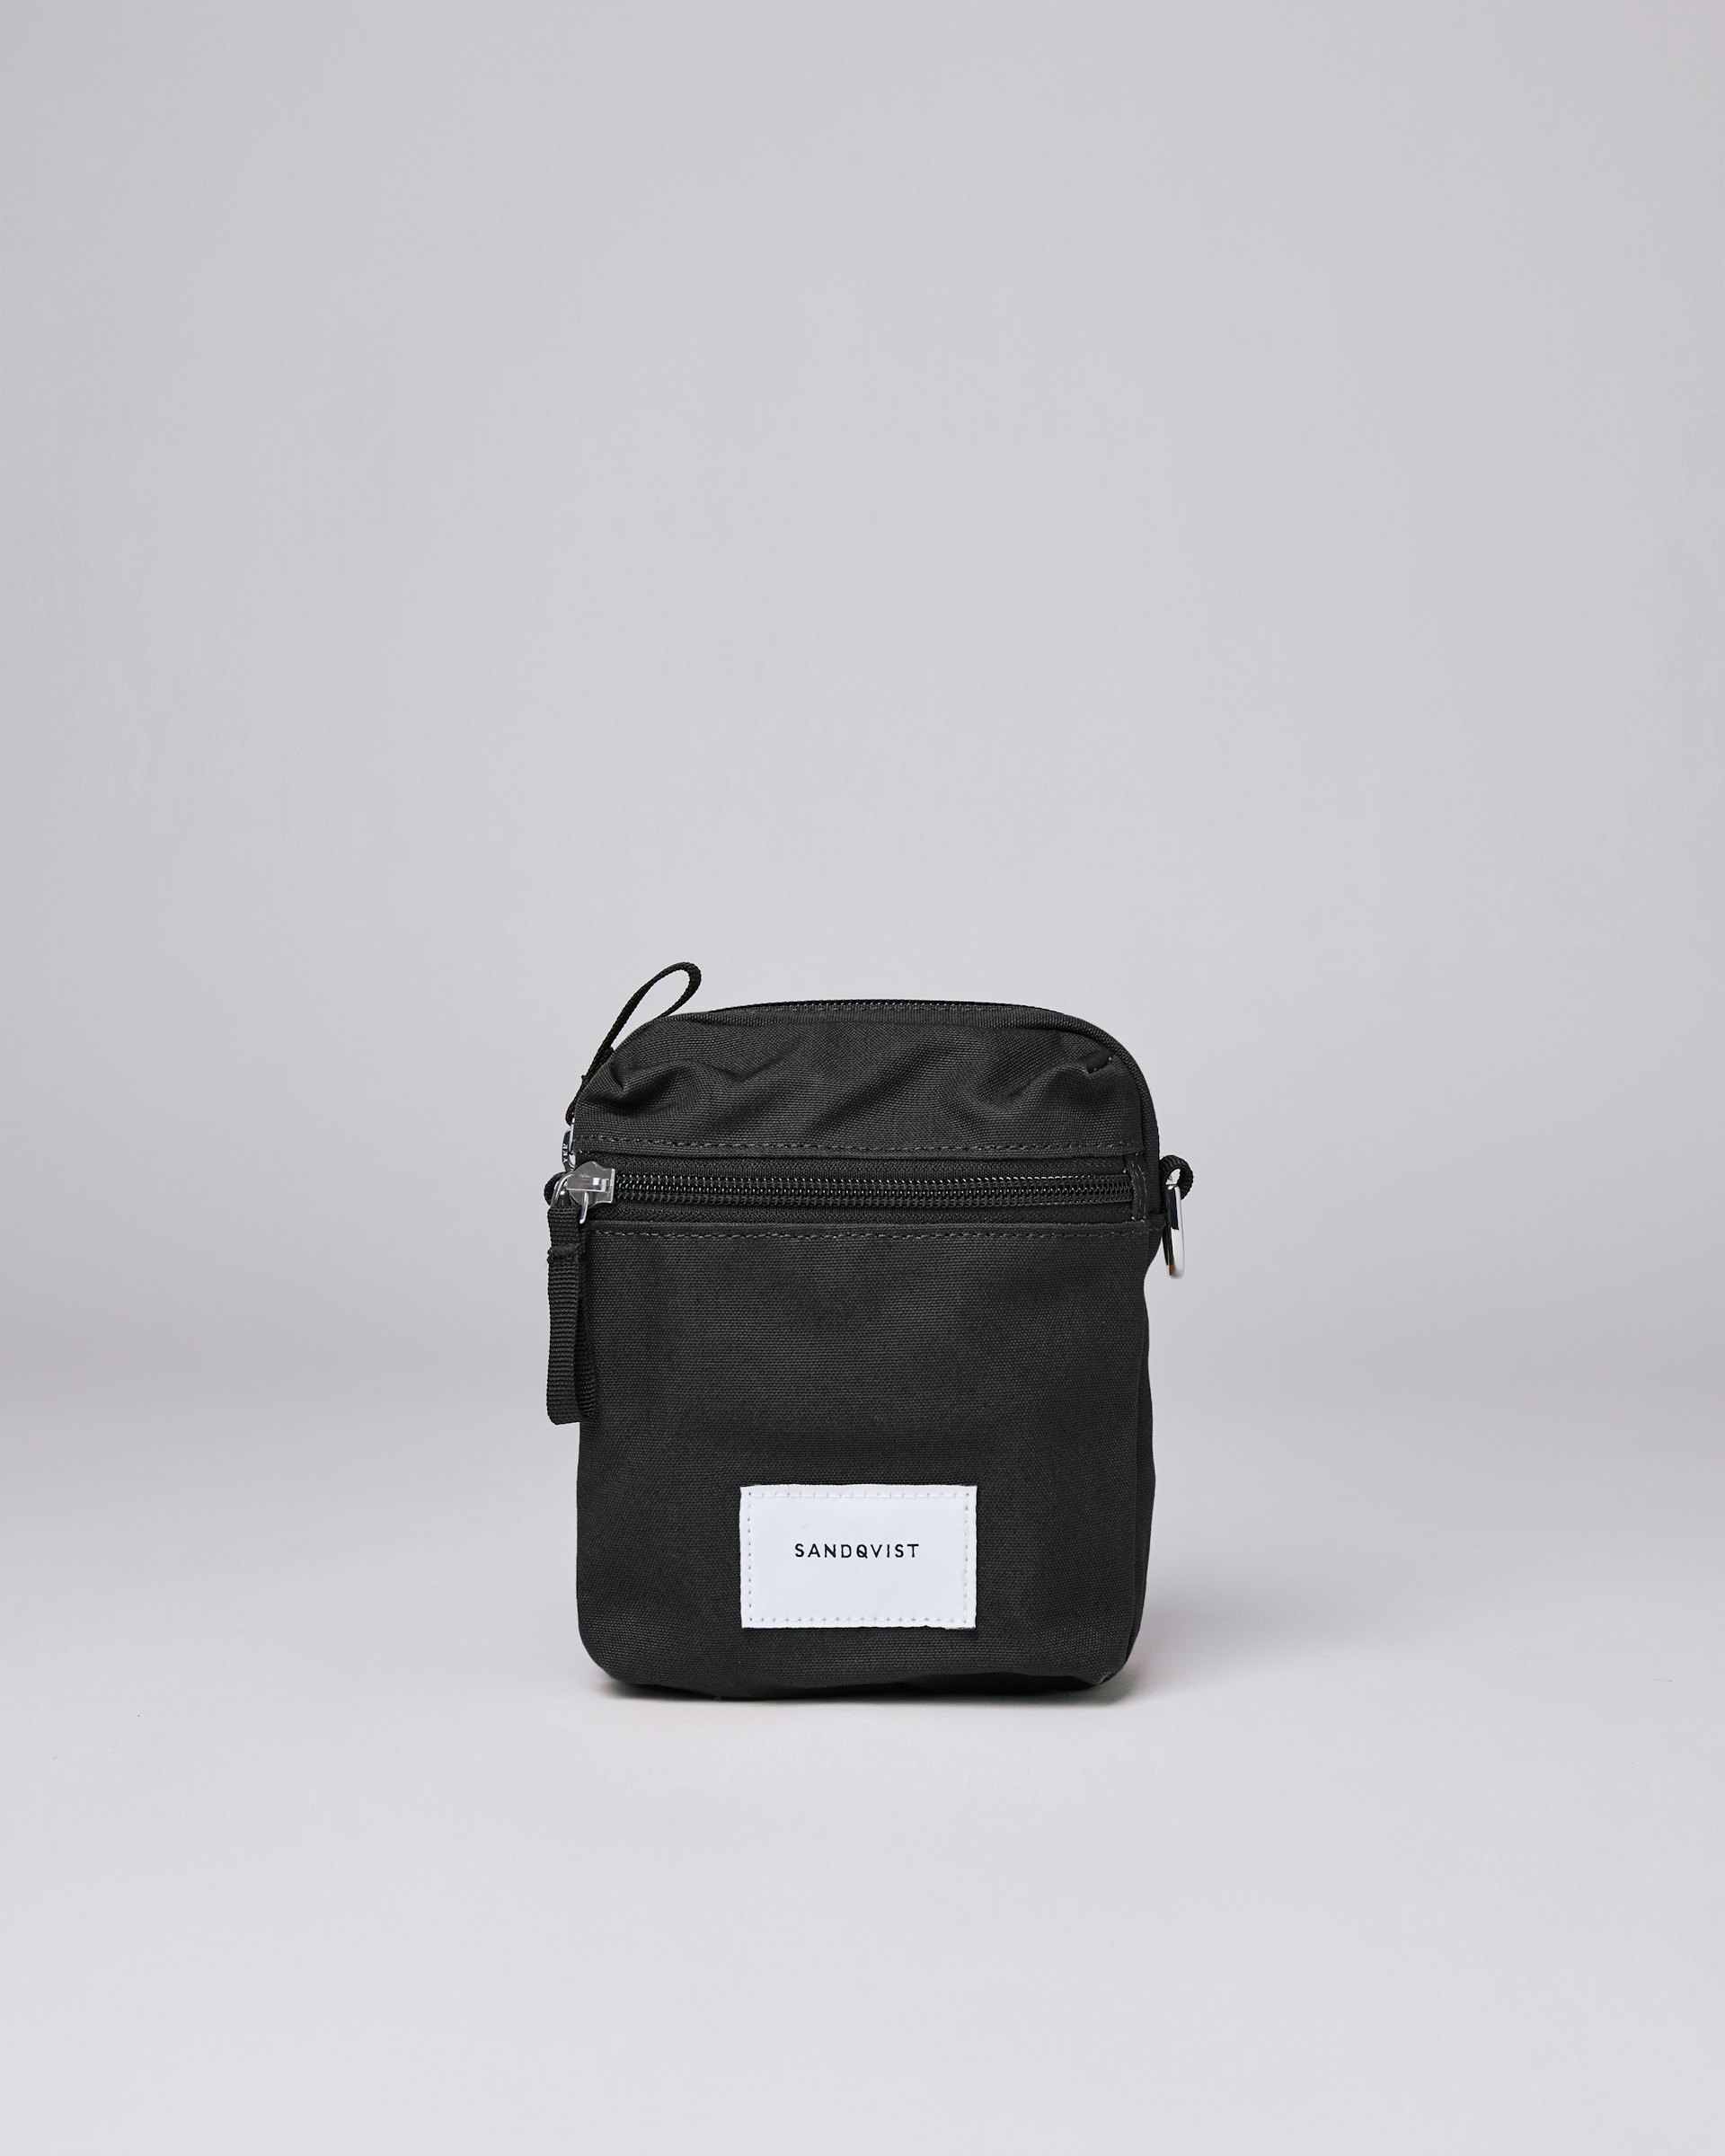 Sixten Vegan Black belongs to the category Shoulder bags and is in color black (1 of 4)